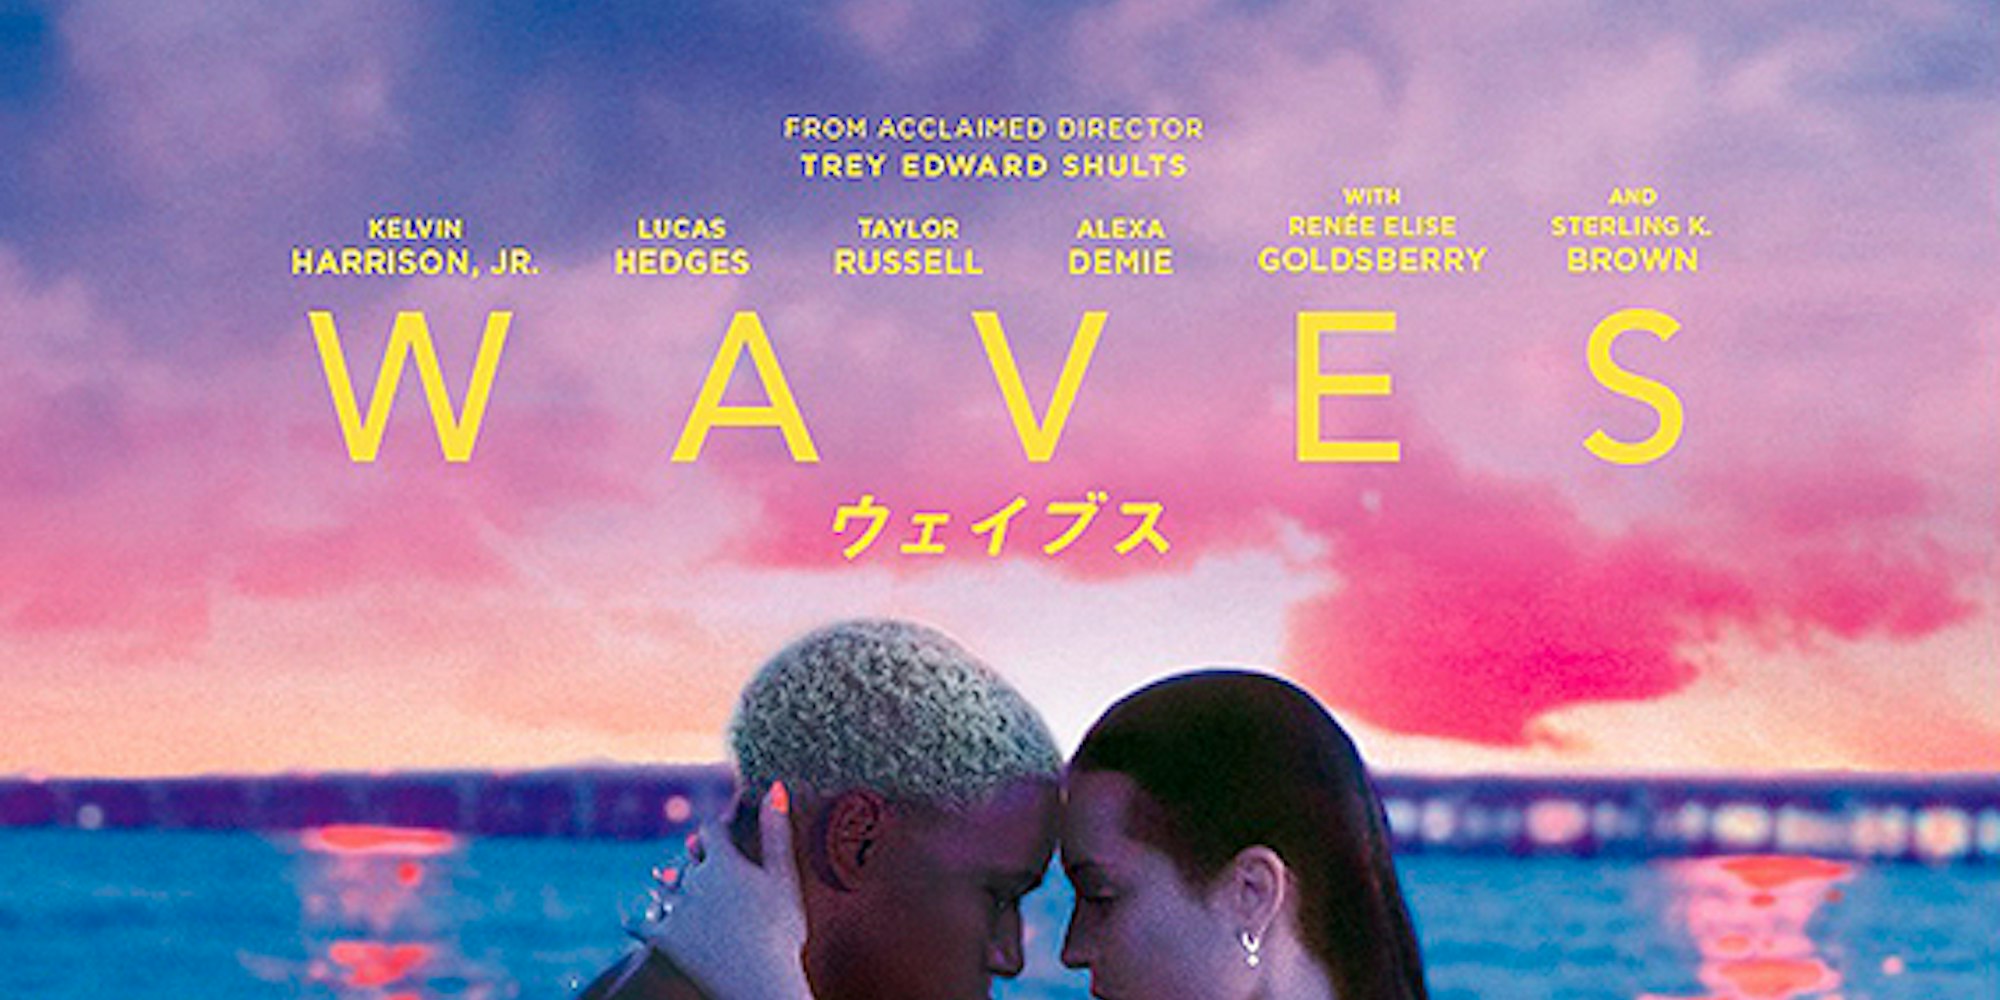 About the Waves soundtrack